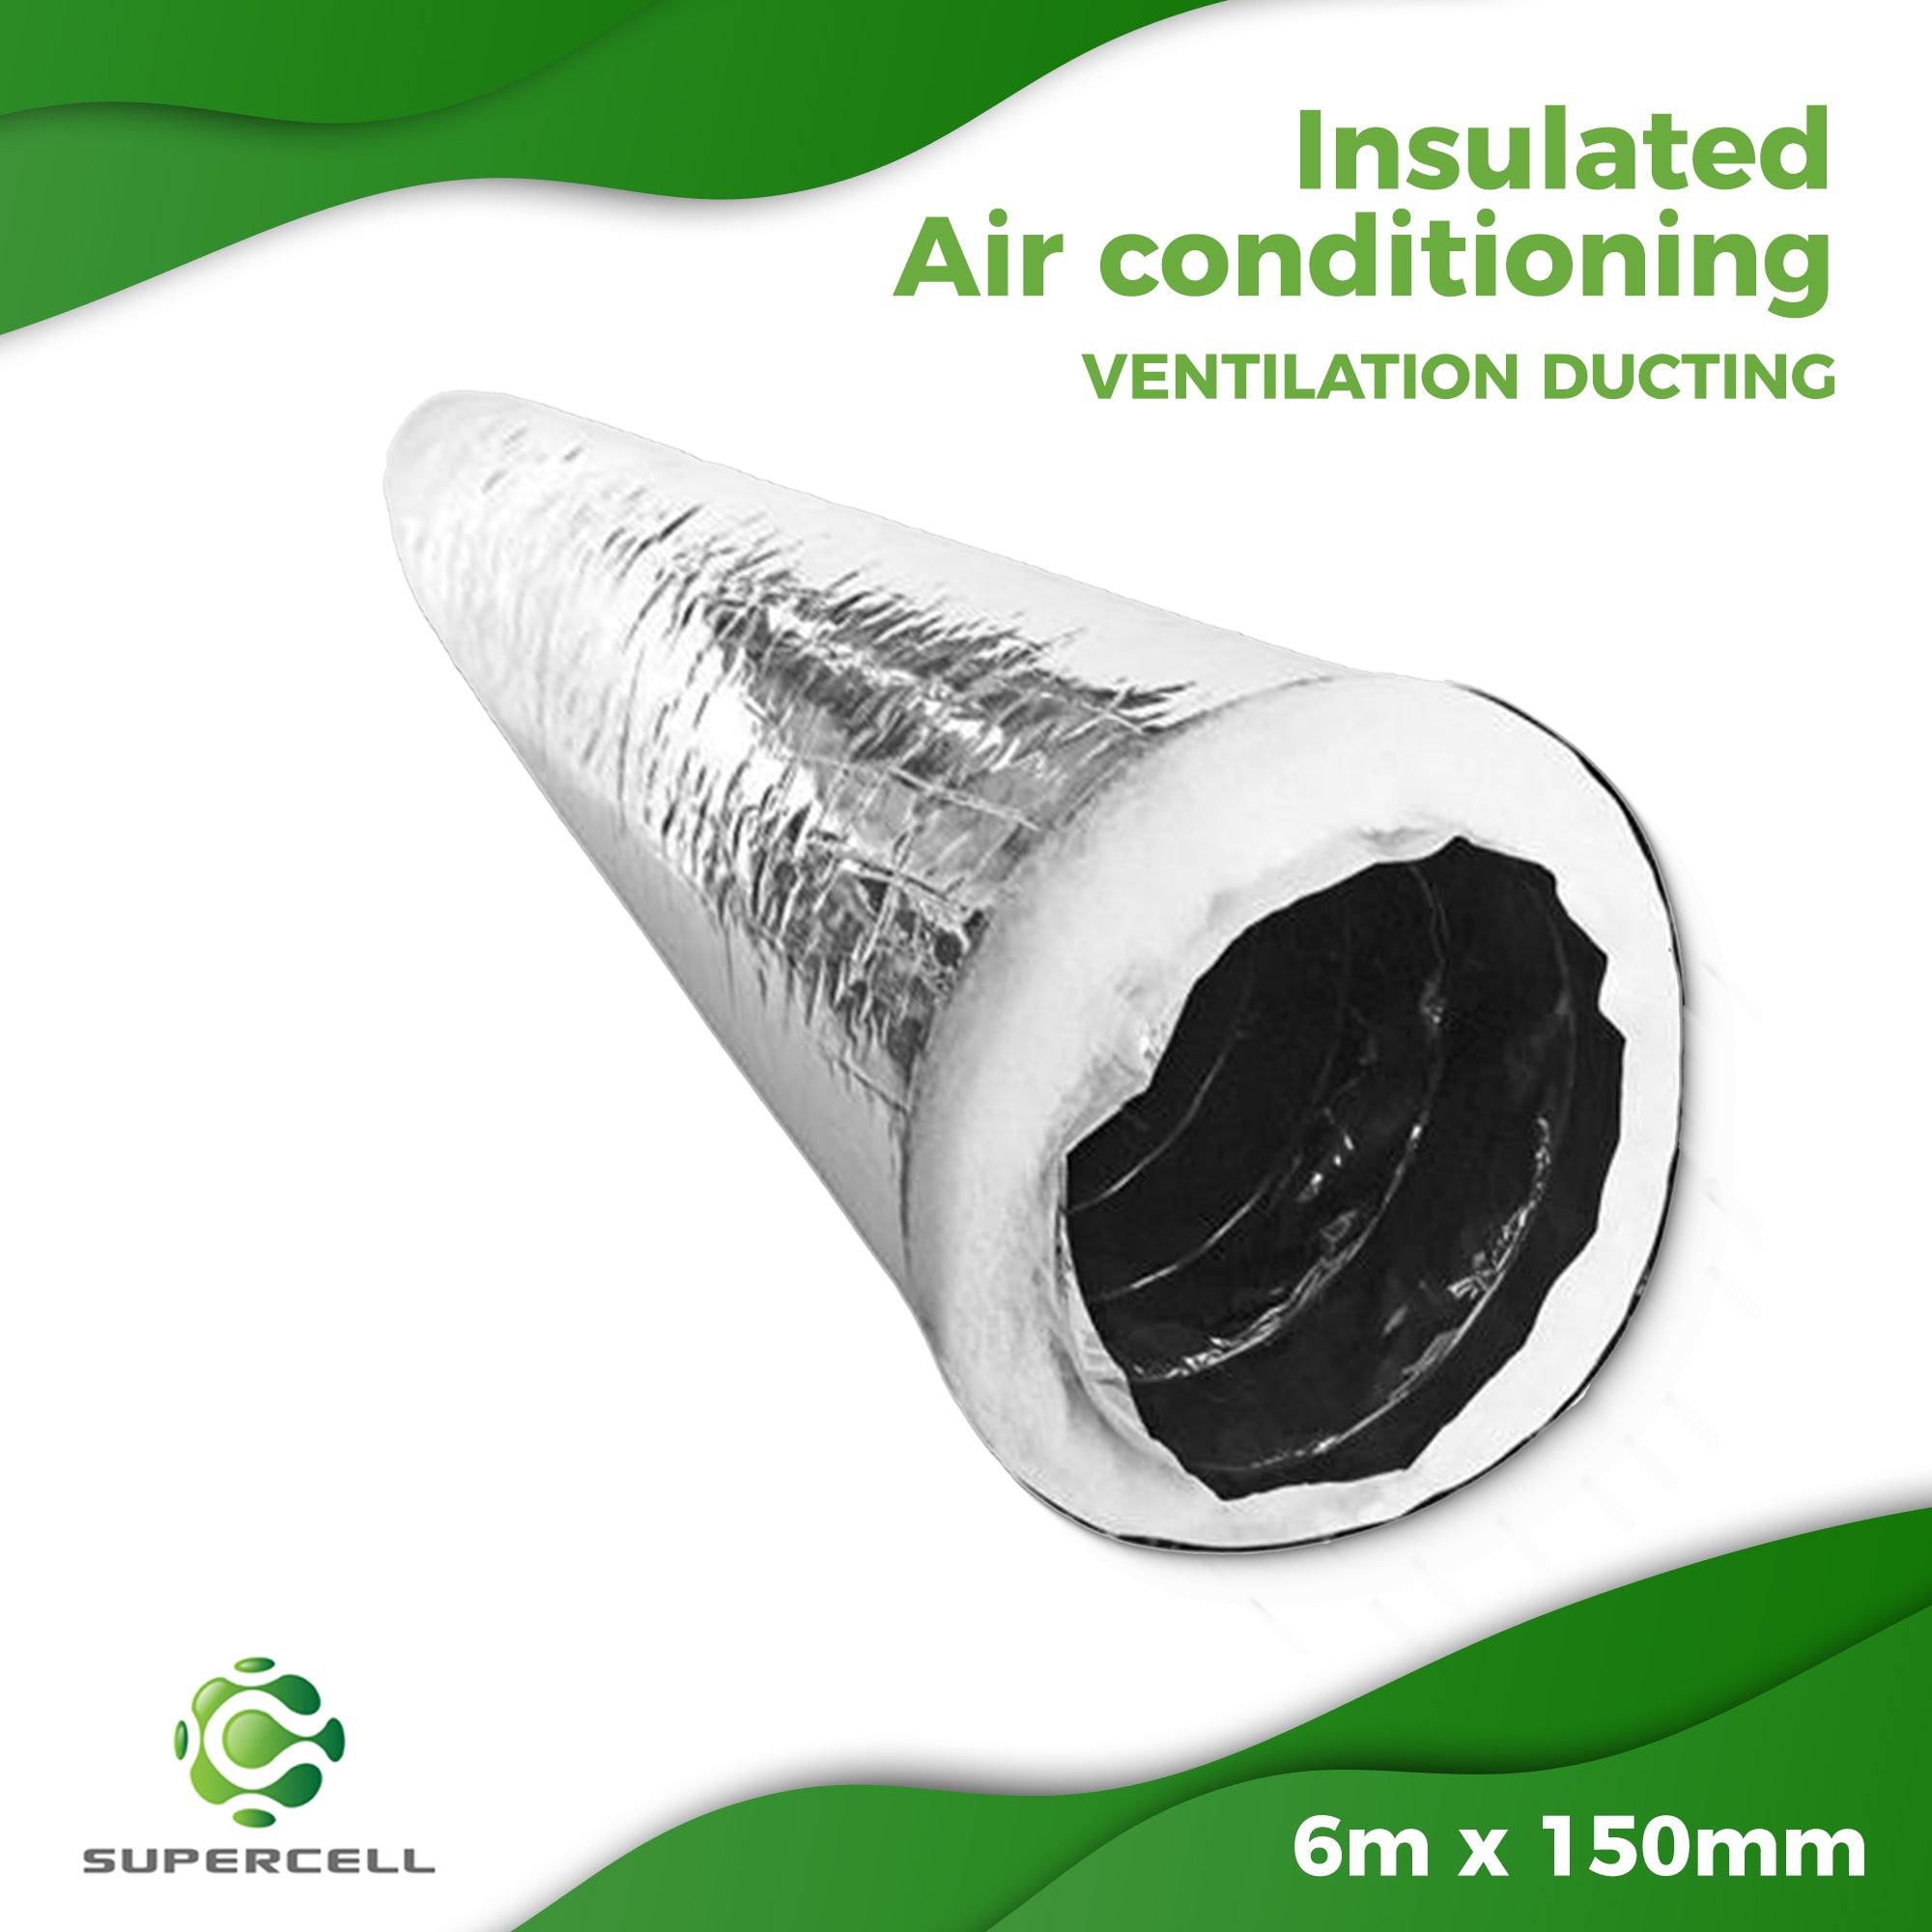 V 6m x 150mm INSULATED FLEXIBLE AIR CONDITIONING VENTILATION DUCTING - supercellnz